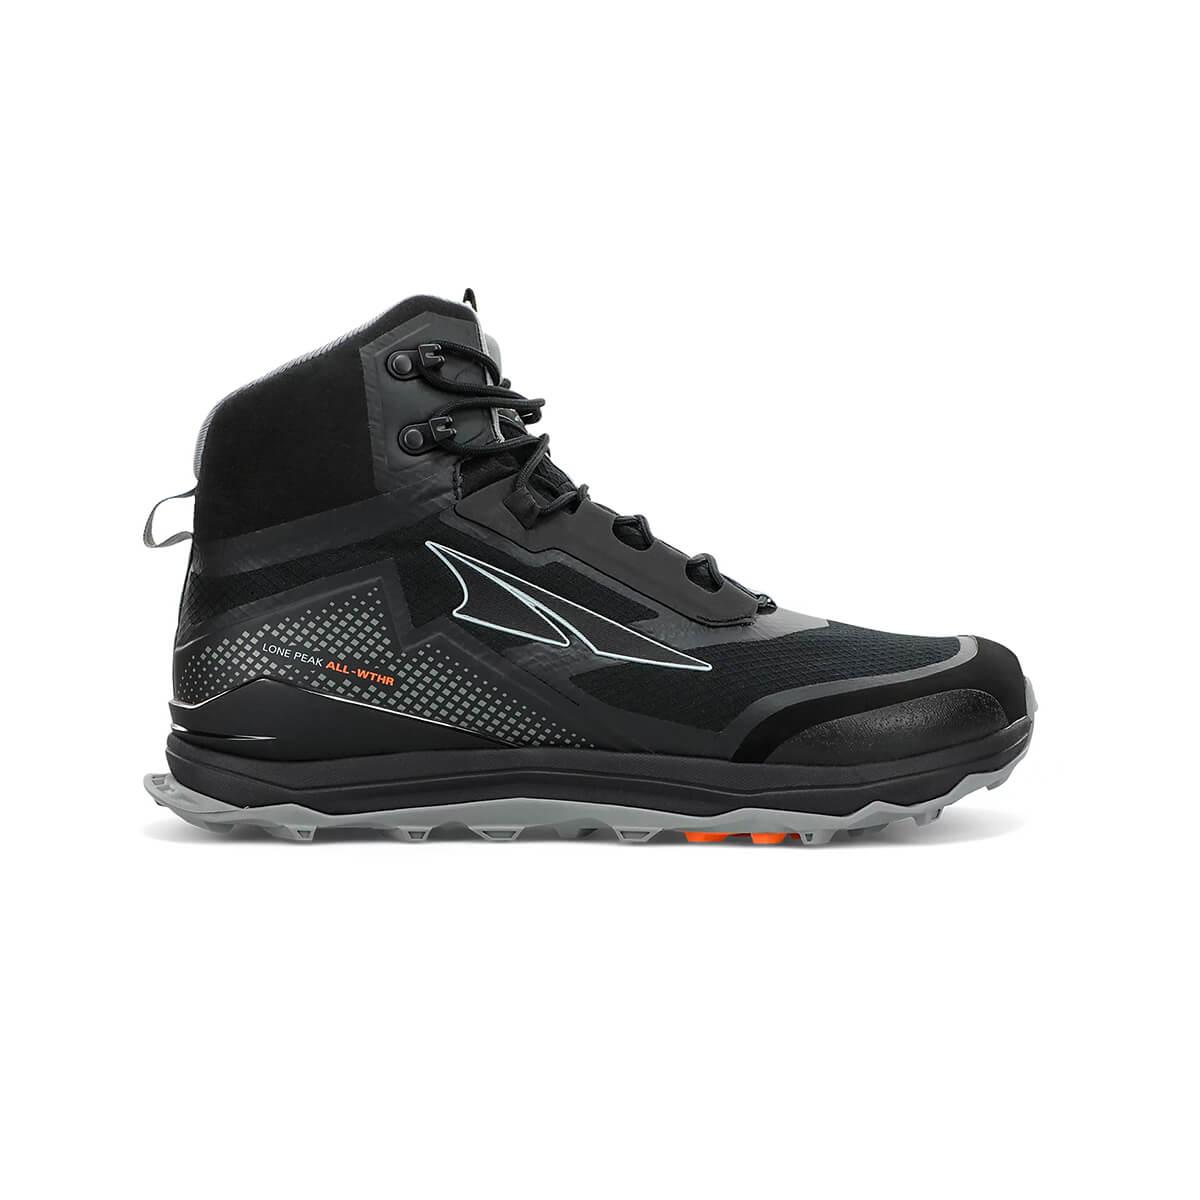  Men's Lone Peak All- Weather Mid Boots